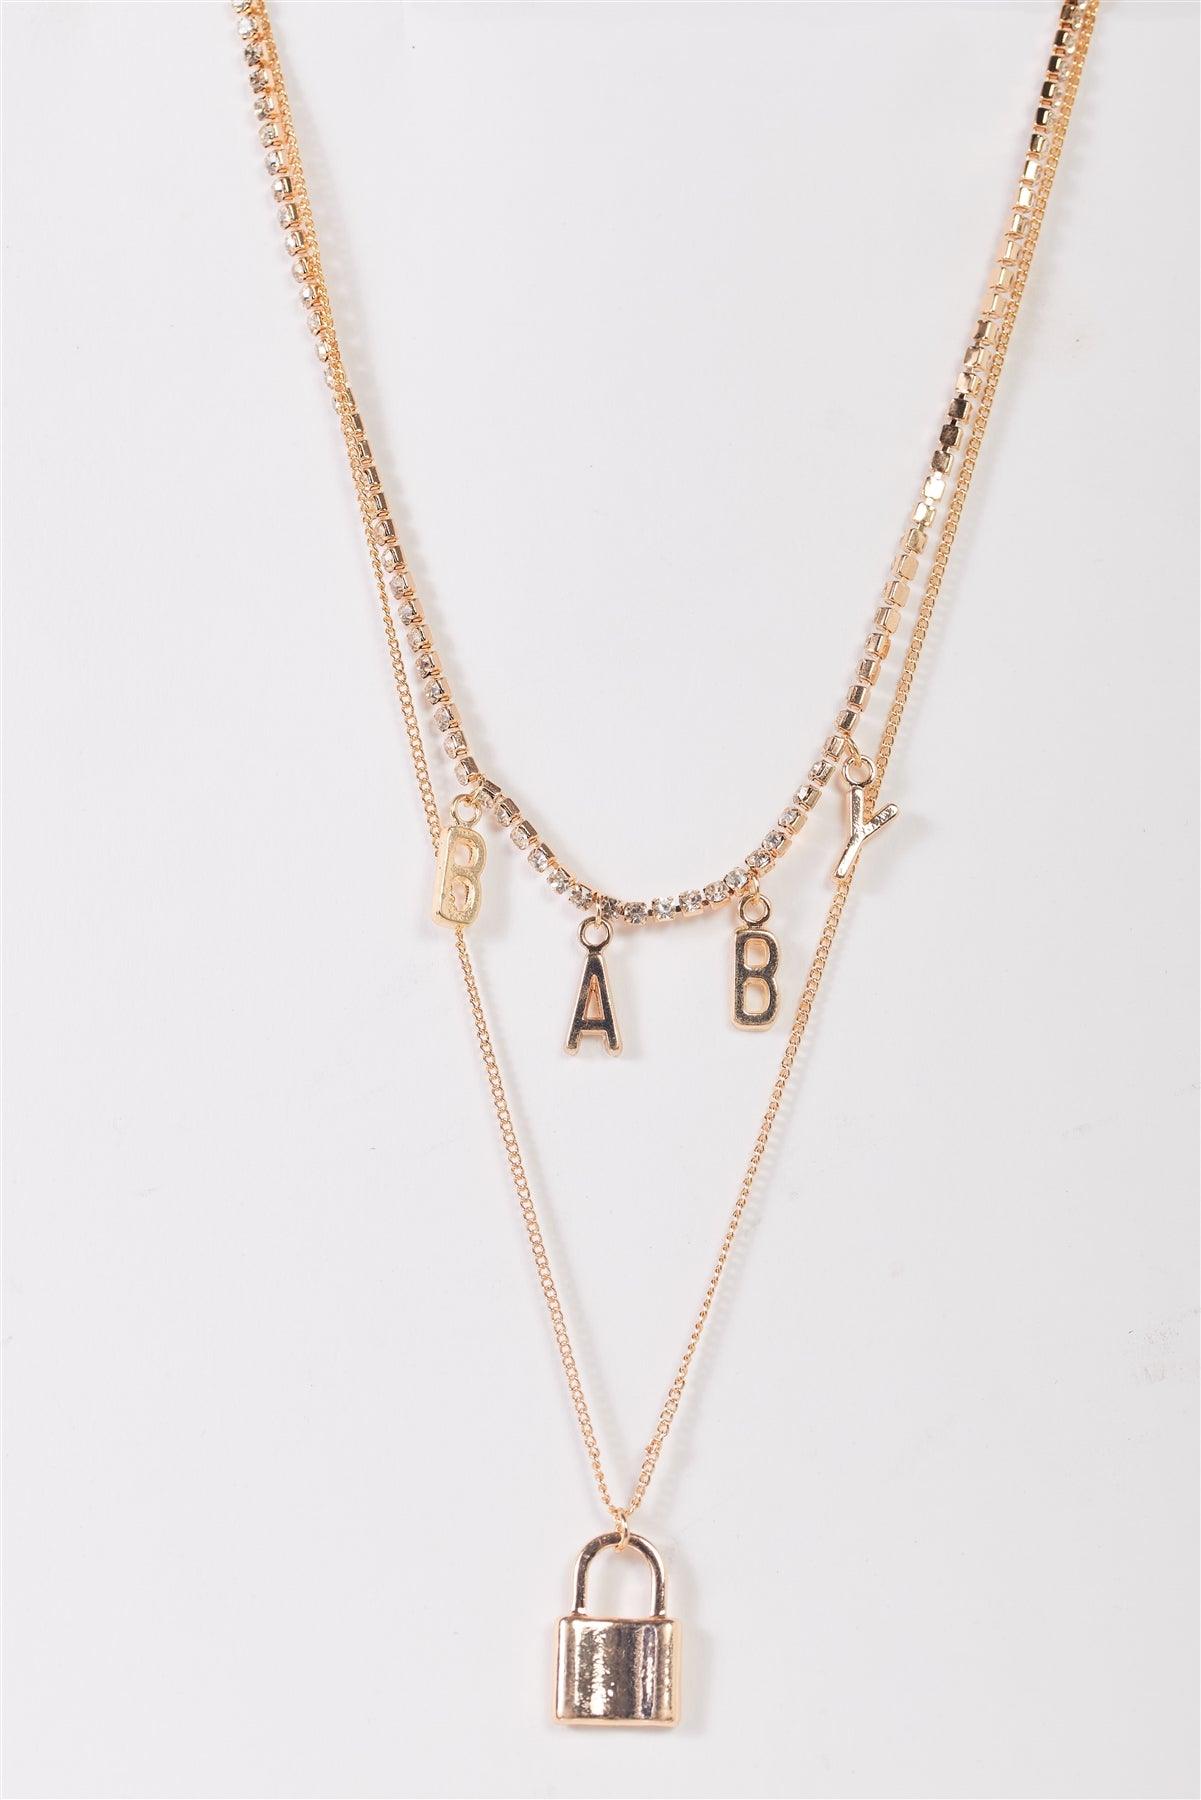 Gold Thin Chain With Padlock Pendant & Tennis Rhinestone Choker With "Baby" Letters  Necklace/3 Pieces